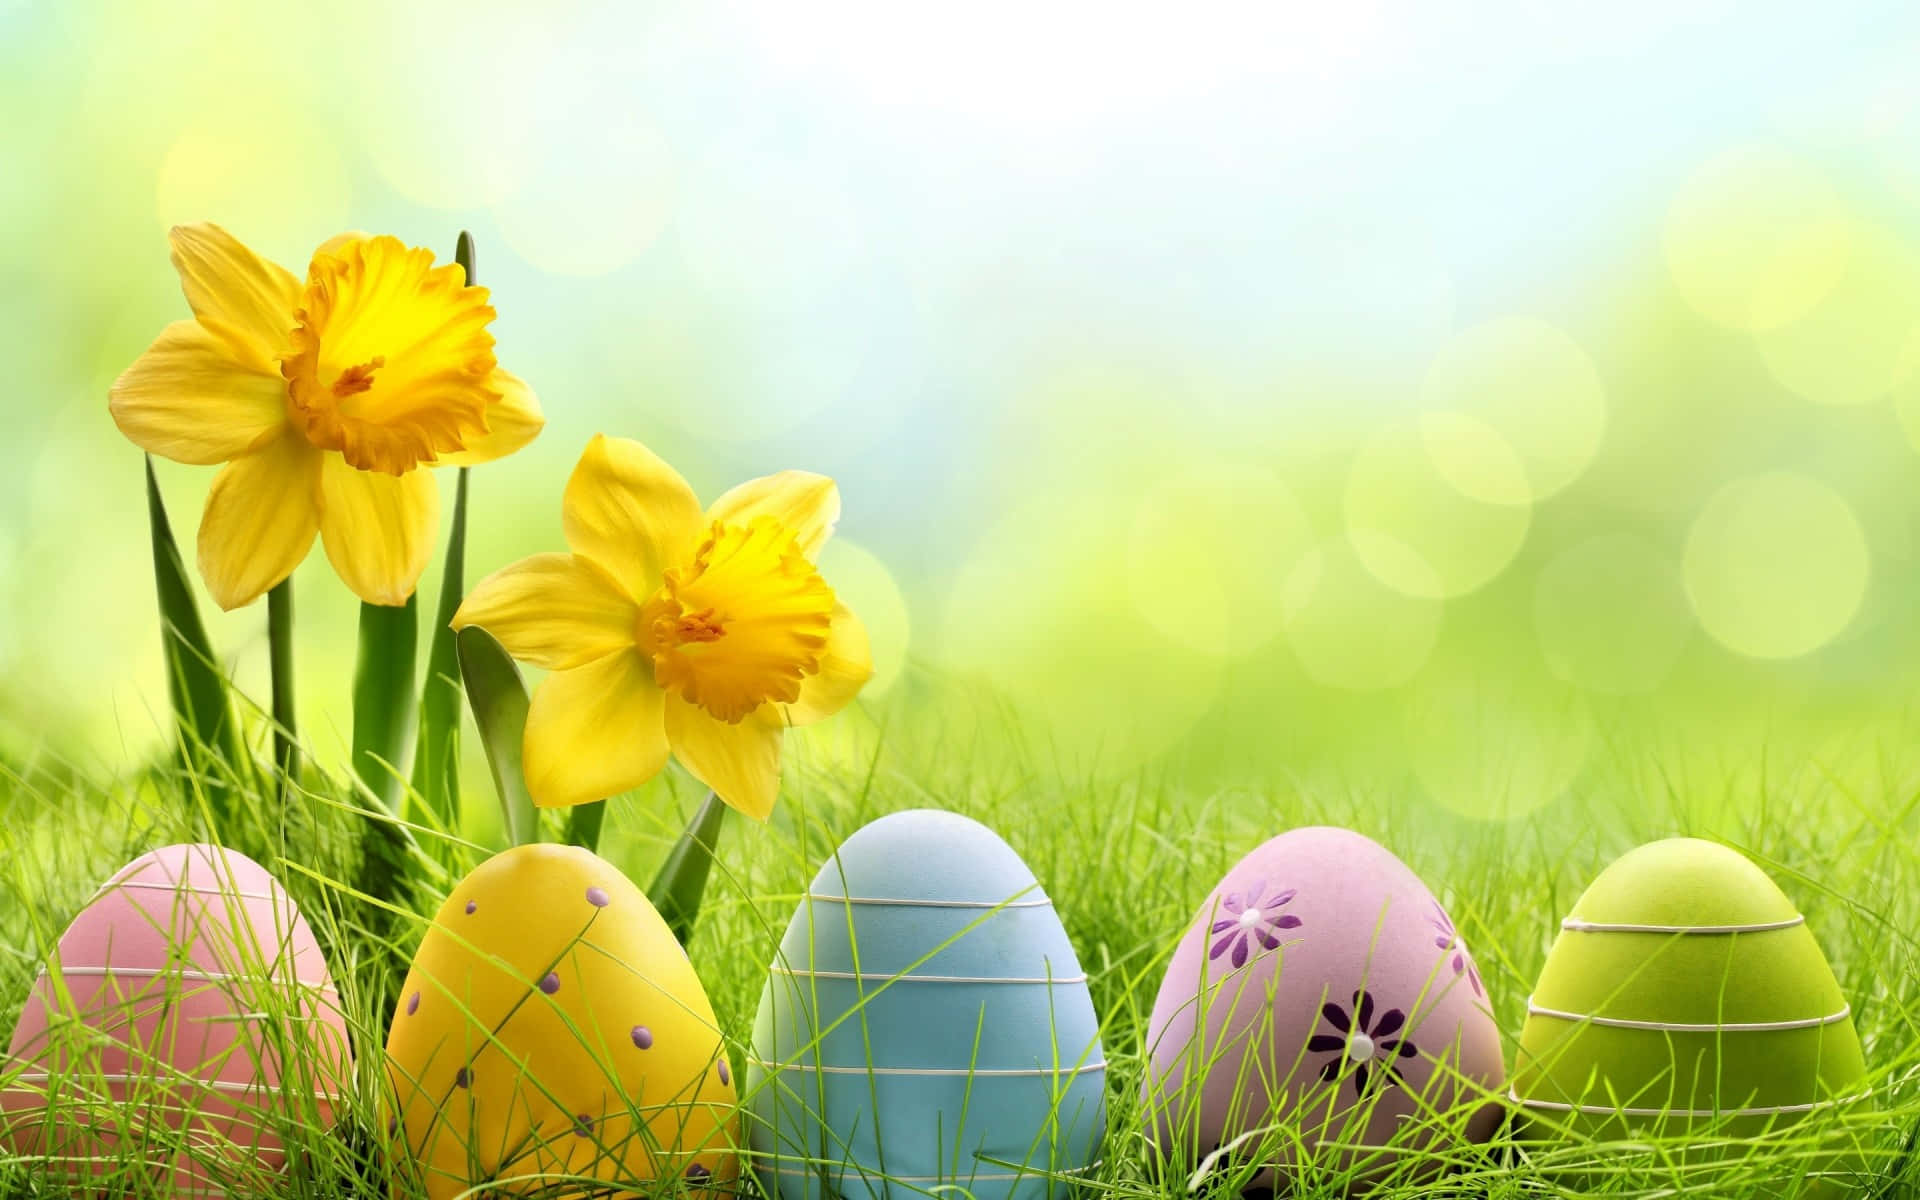 Funny Easter Eggs With Yellow Flowers Picture